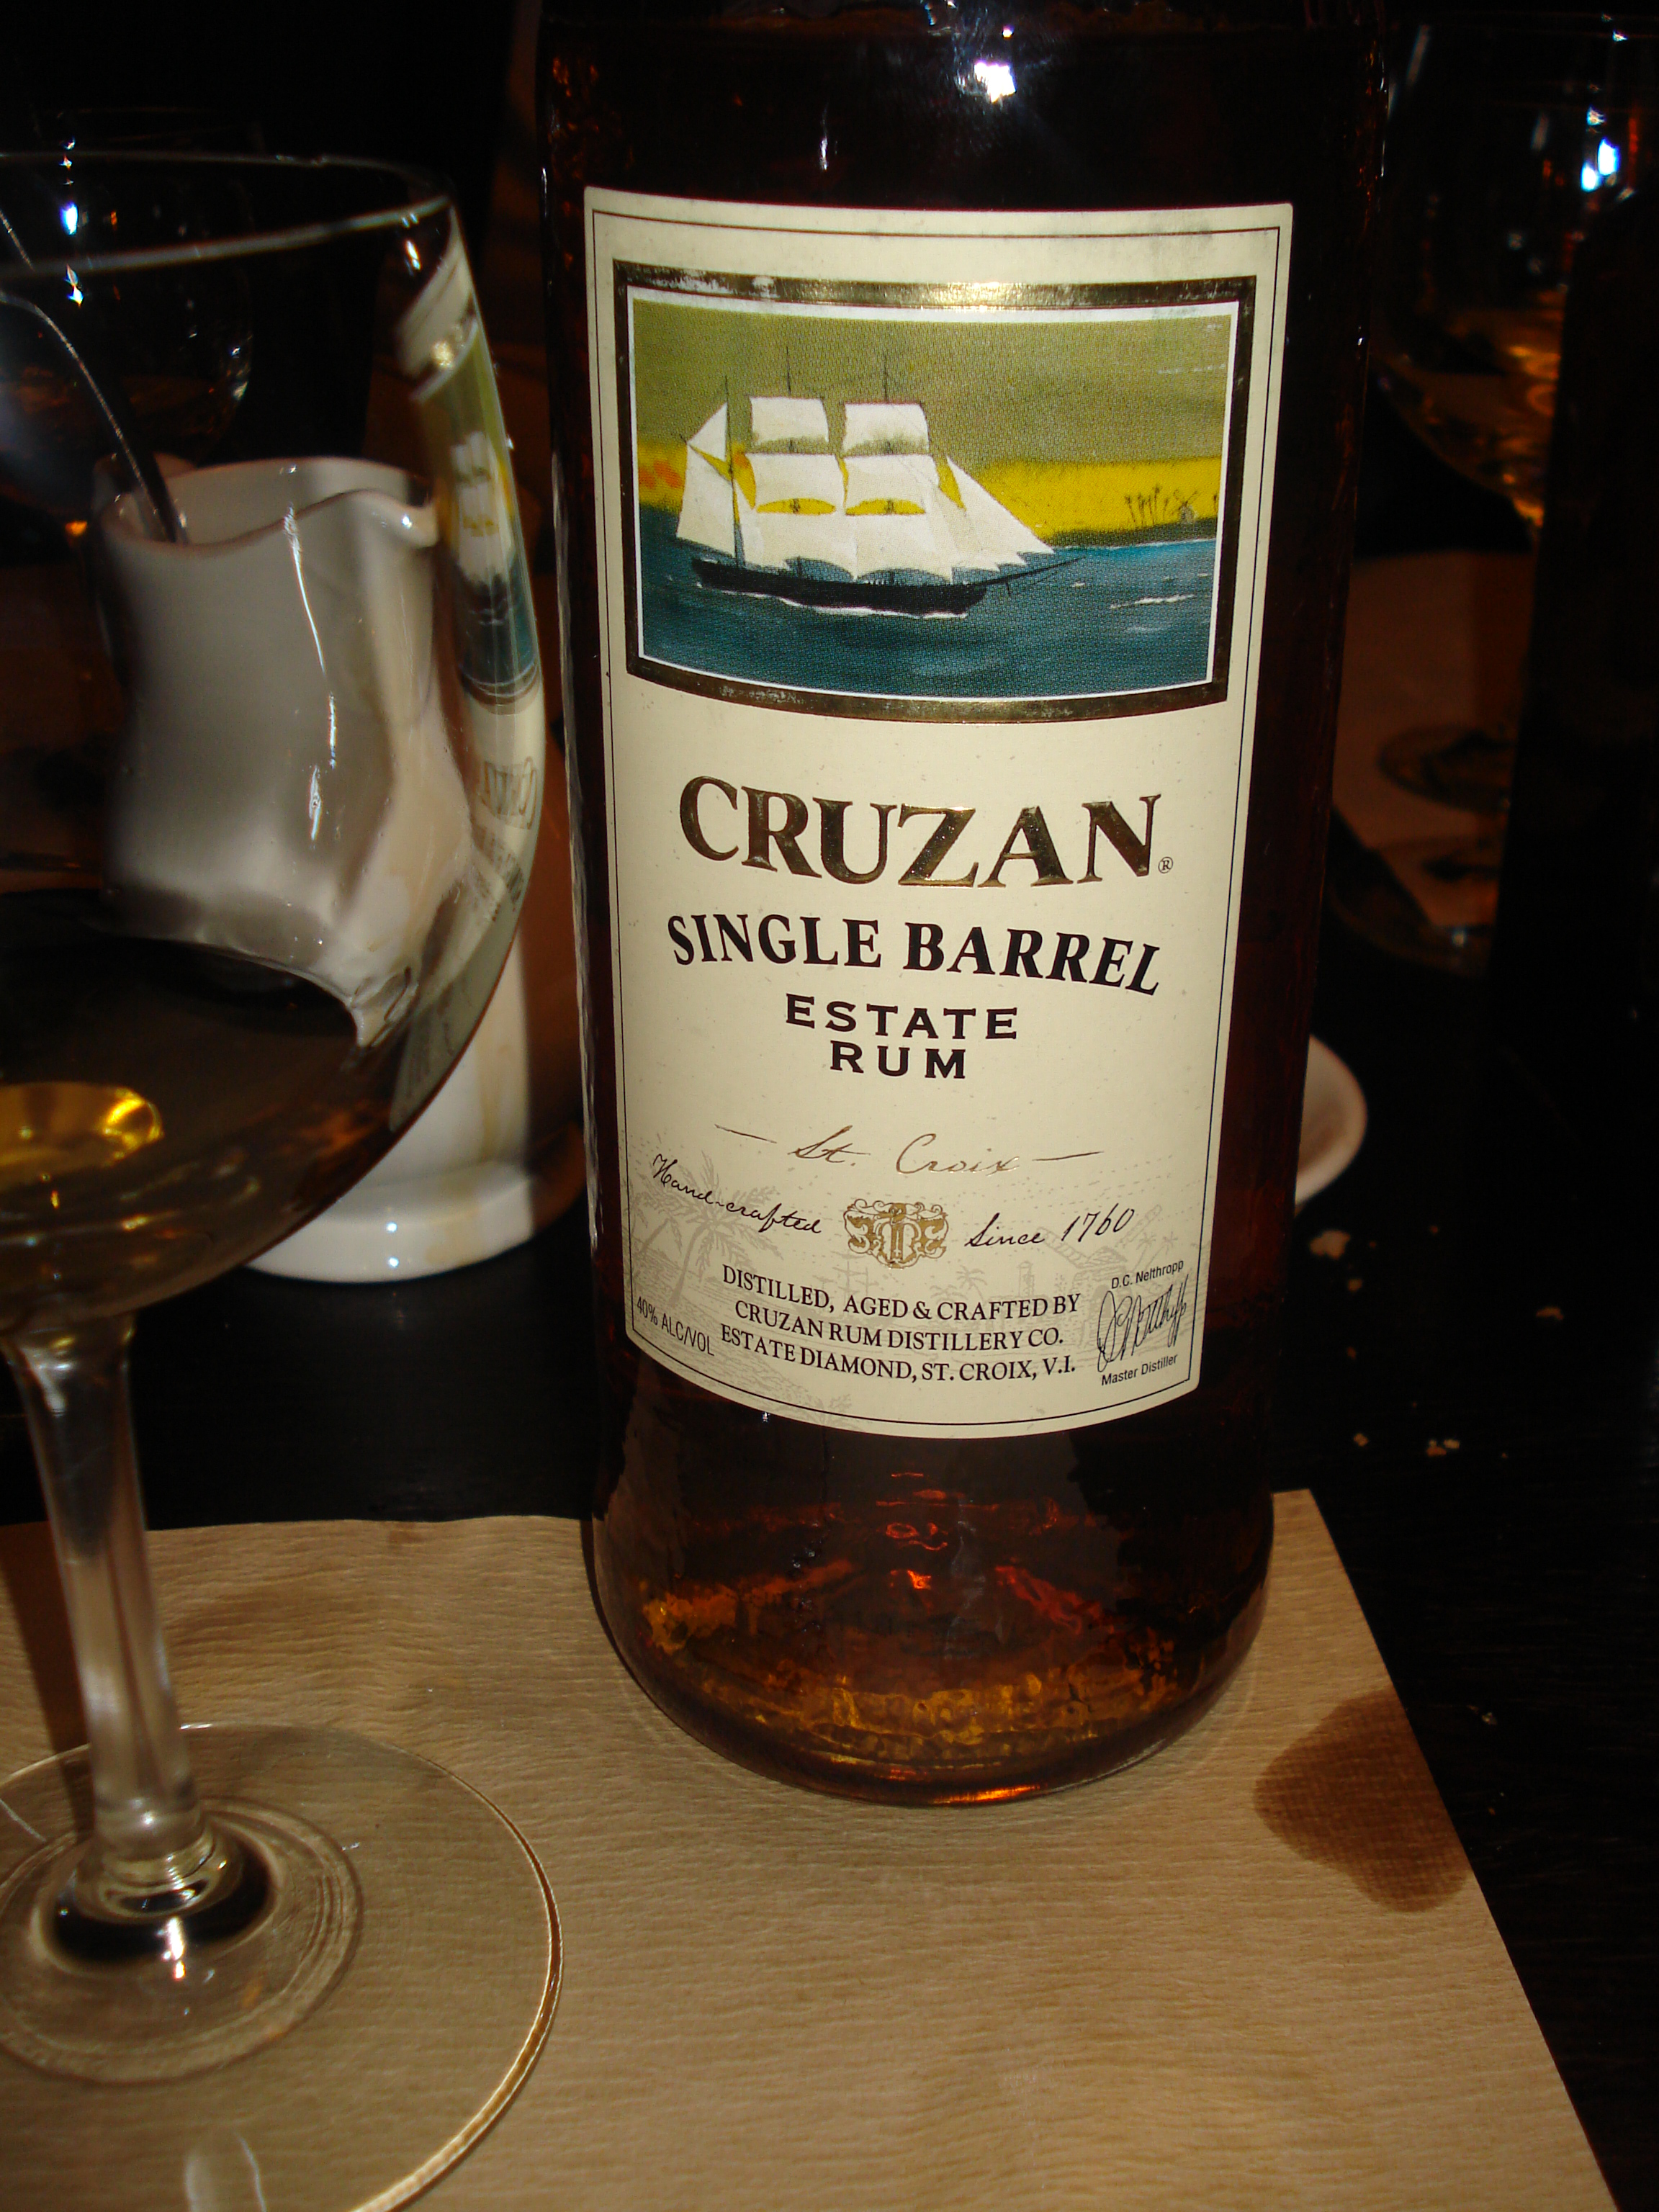 Cruzan Single Barrel, a blend of rums aged 5 to 12 years